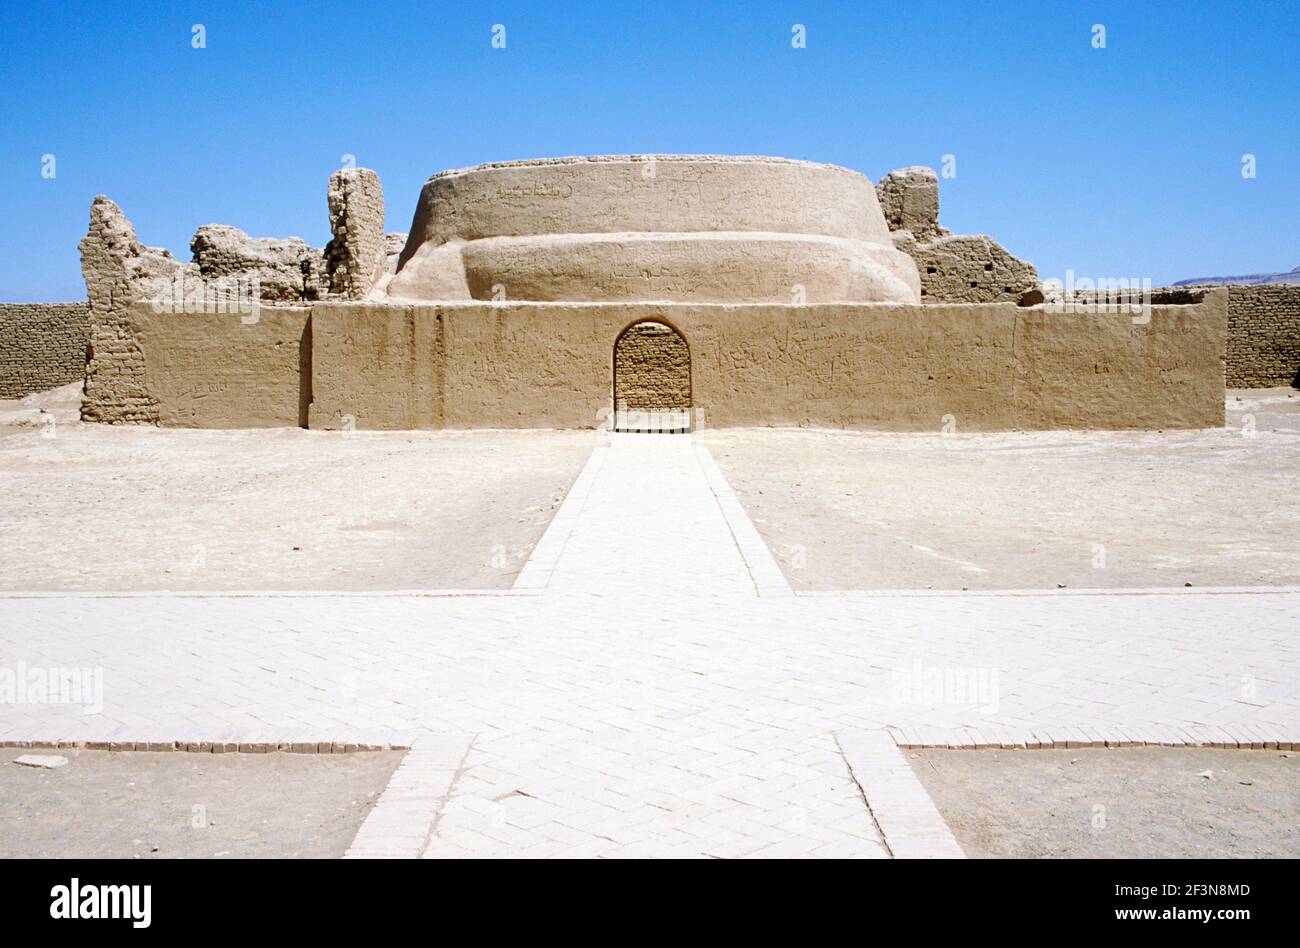 Gaochang is an oasis city on the northern rim of the Taklamakan Desert. The ancient Uigur capital was founded in the 1st century. Buddhism was brought Stock Photo